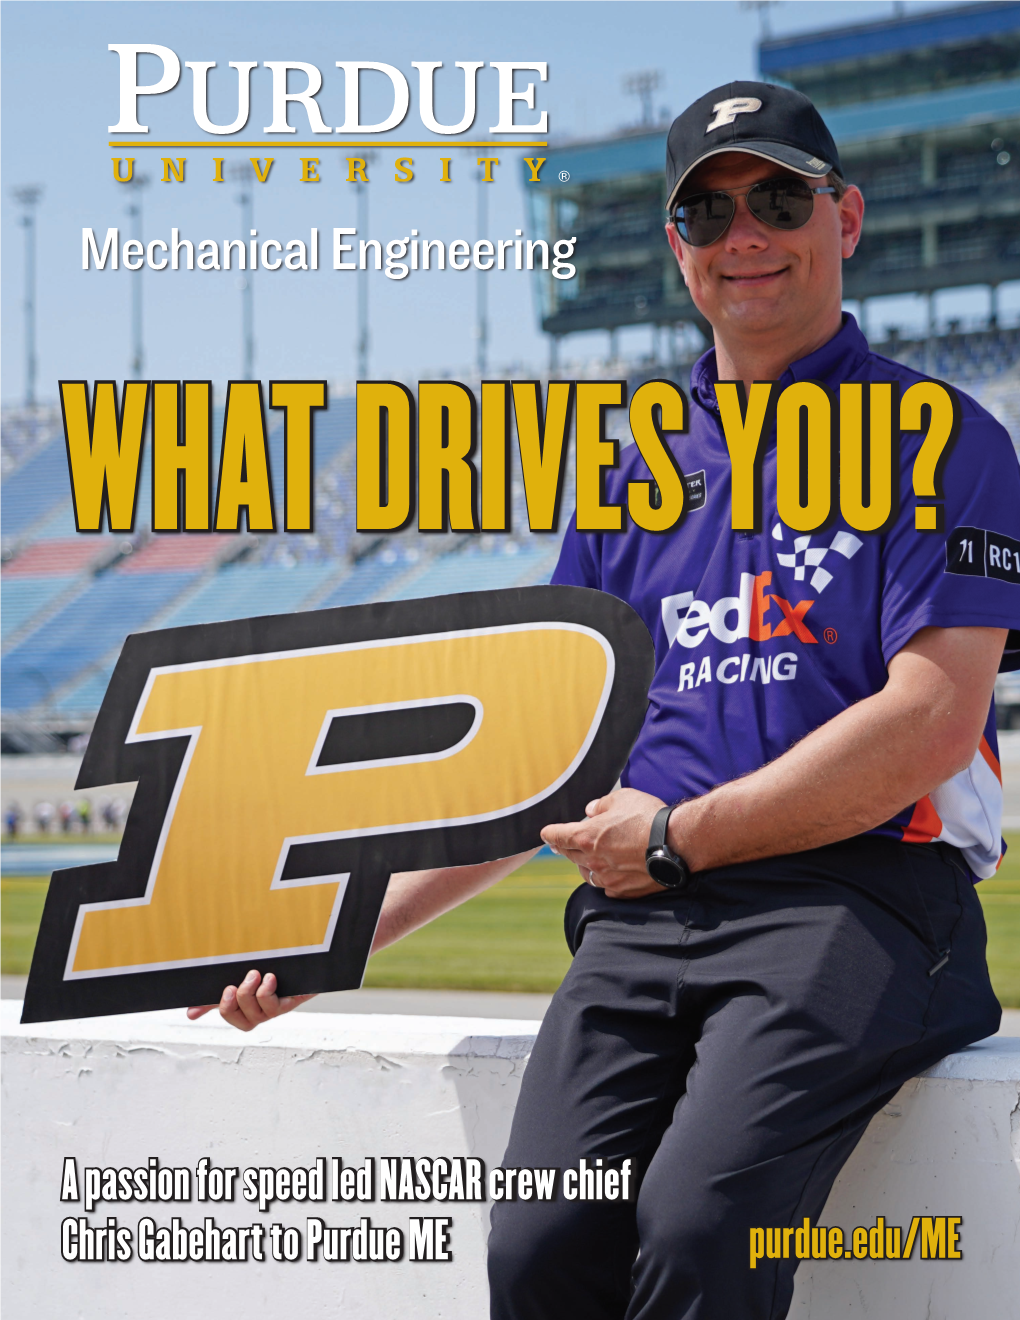 A Passion for Speed Led NASCAR Crew Chief Chris Gabehart To